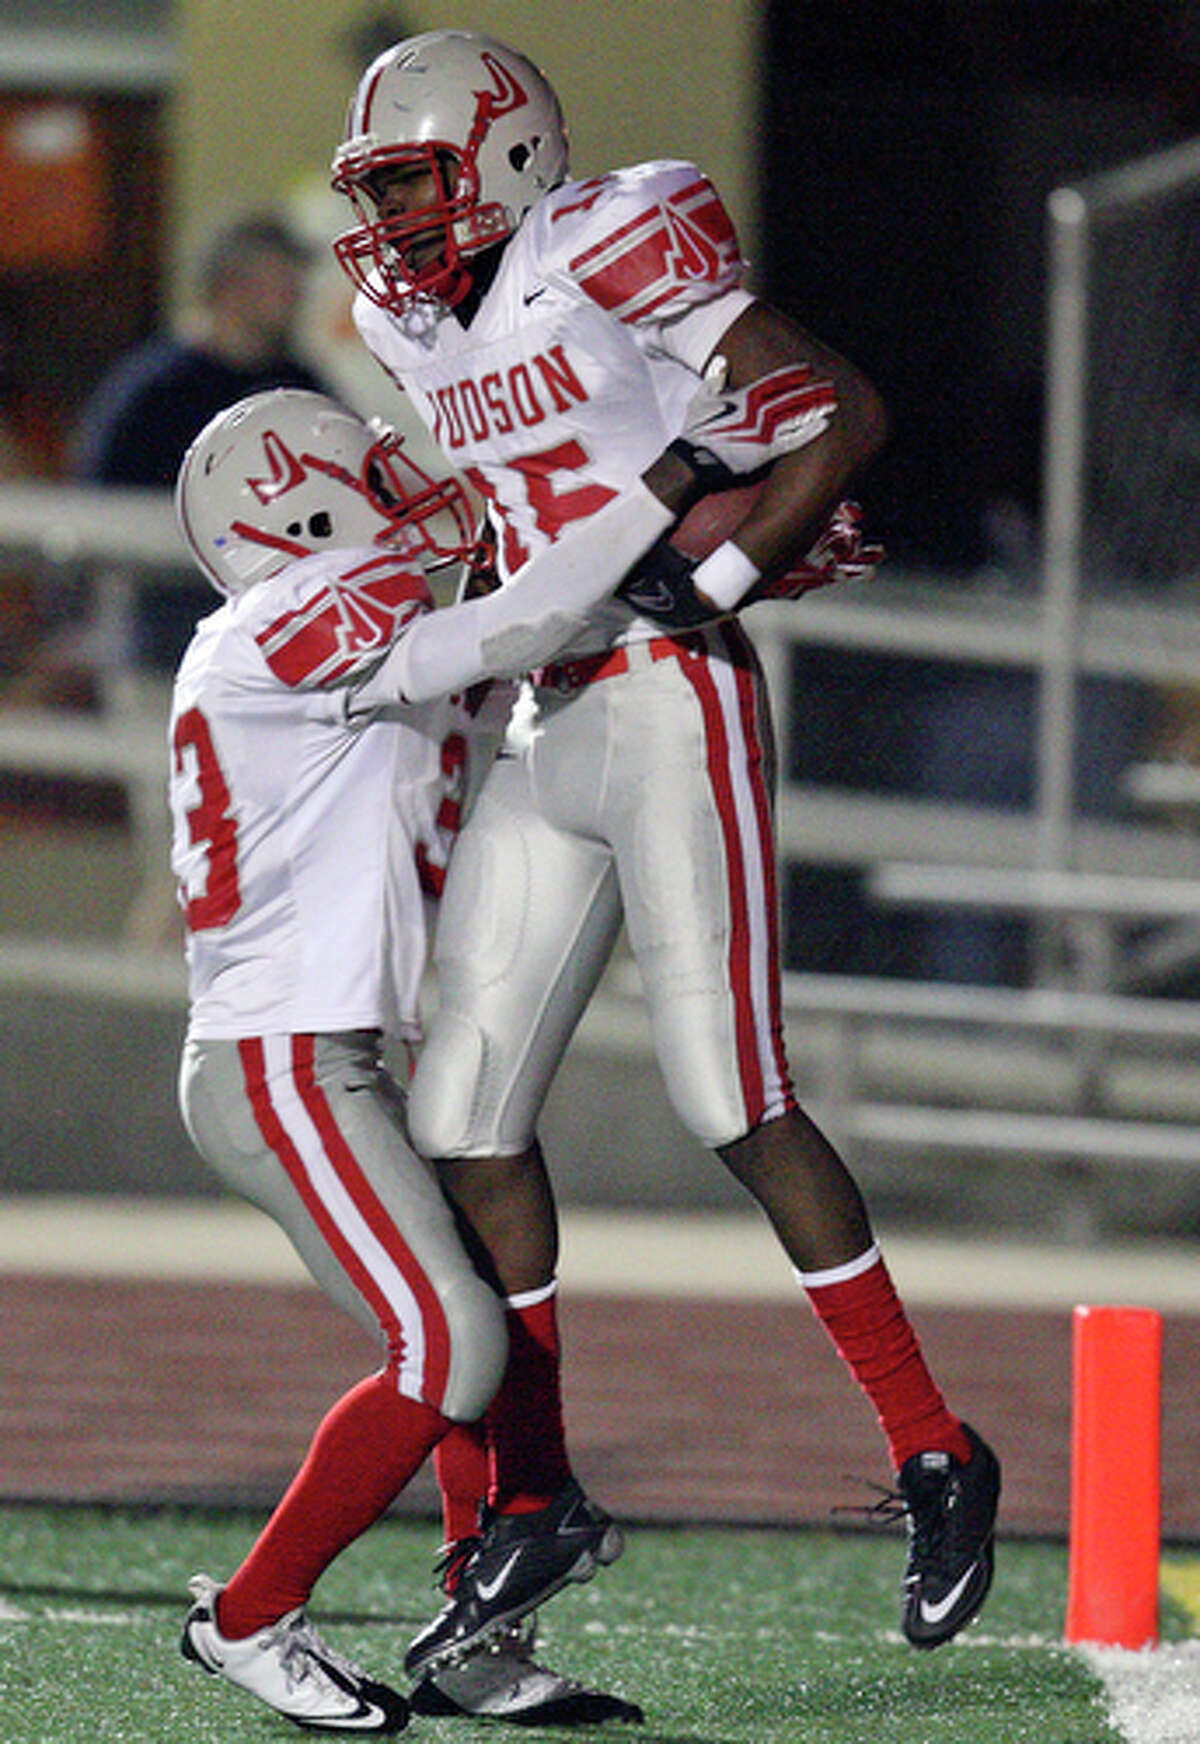 Judson's Isaac Gilmer (left) celebrates with teammate Judson's Tyrone Dotcie after Dotcie scored a touchdown against Madison Friday Nov. 12, 2010 at Comalander Stadium. Judson won 24-17.